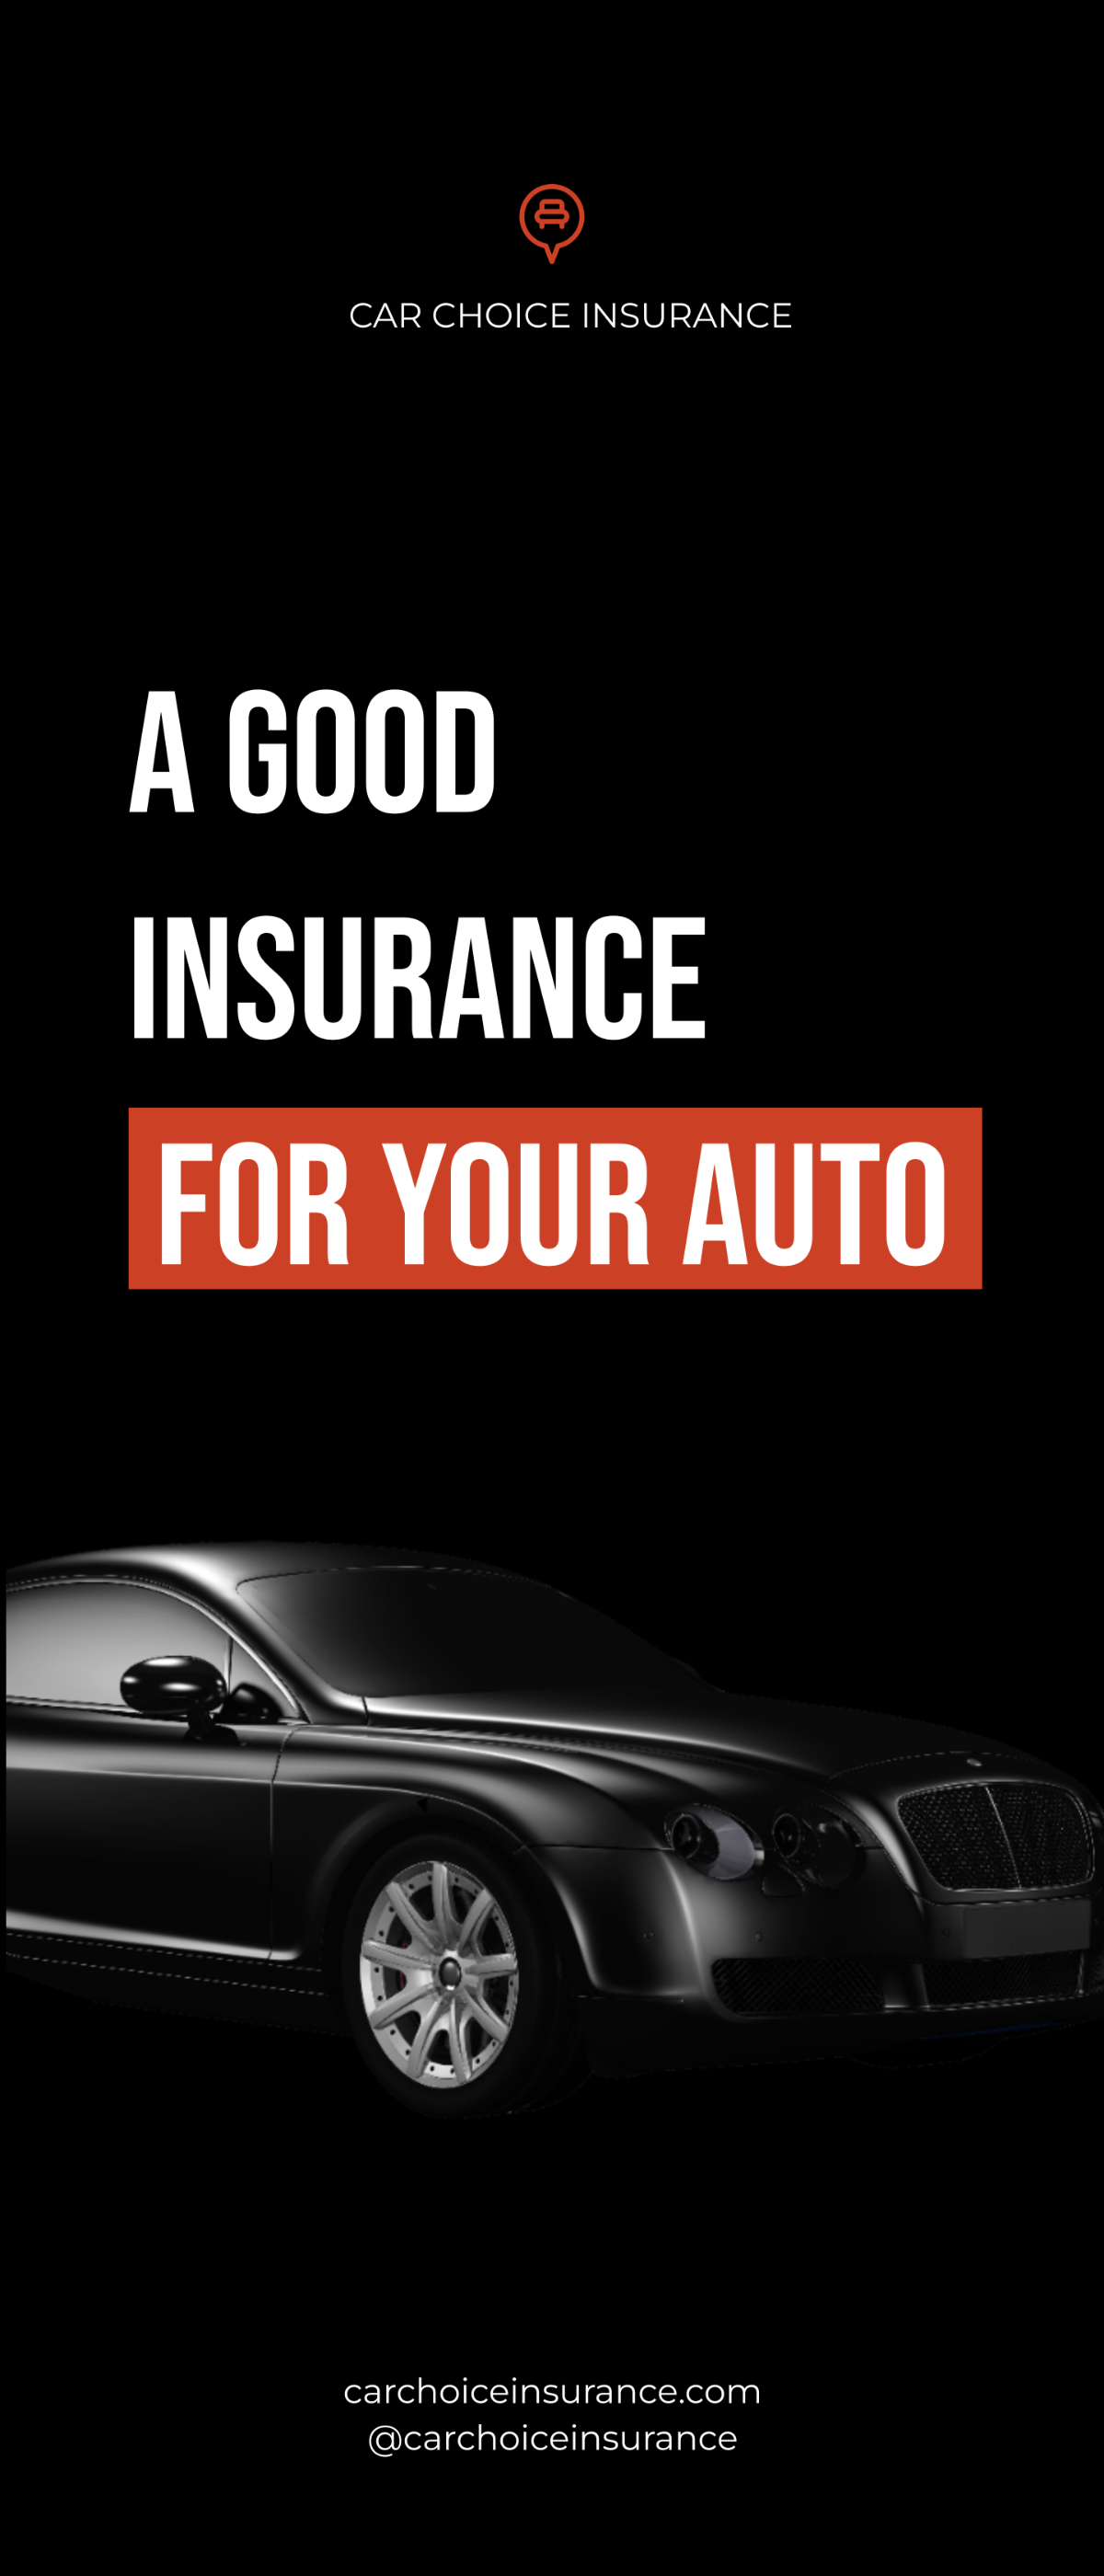 Auto Insurance Rollup Banner Template